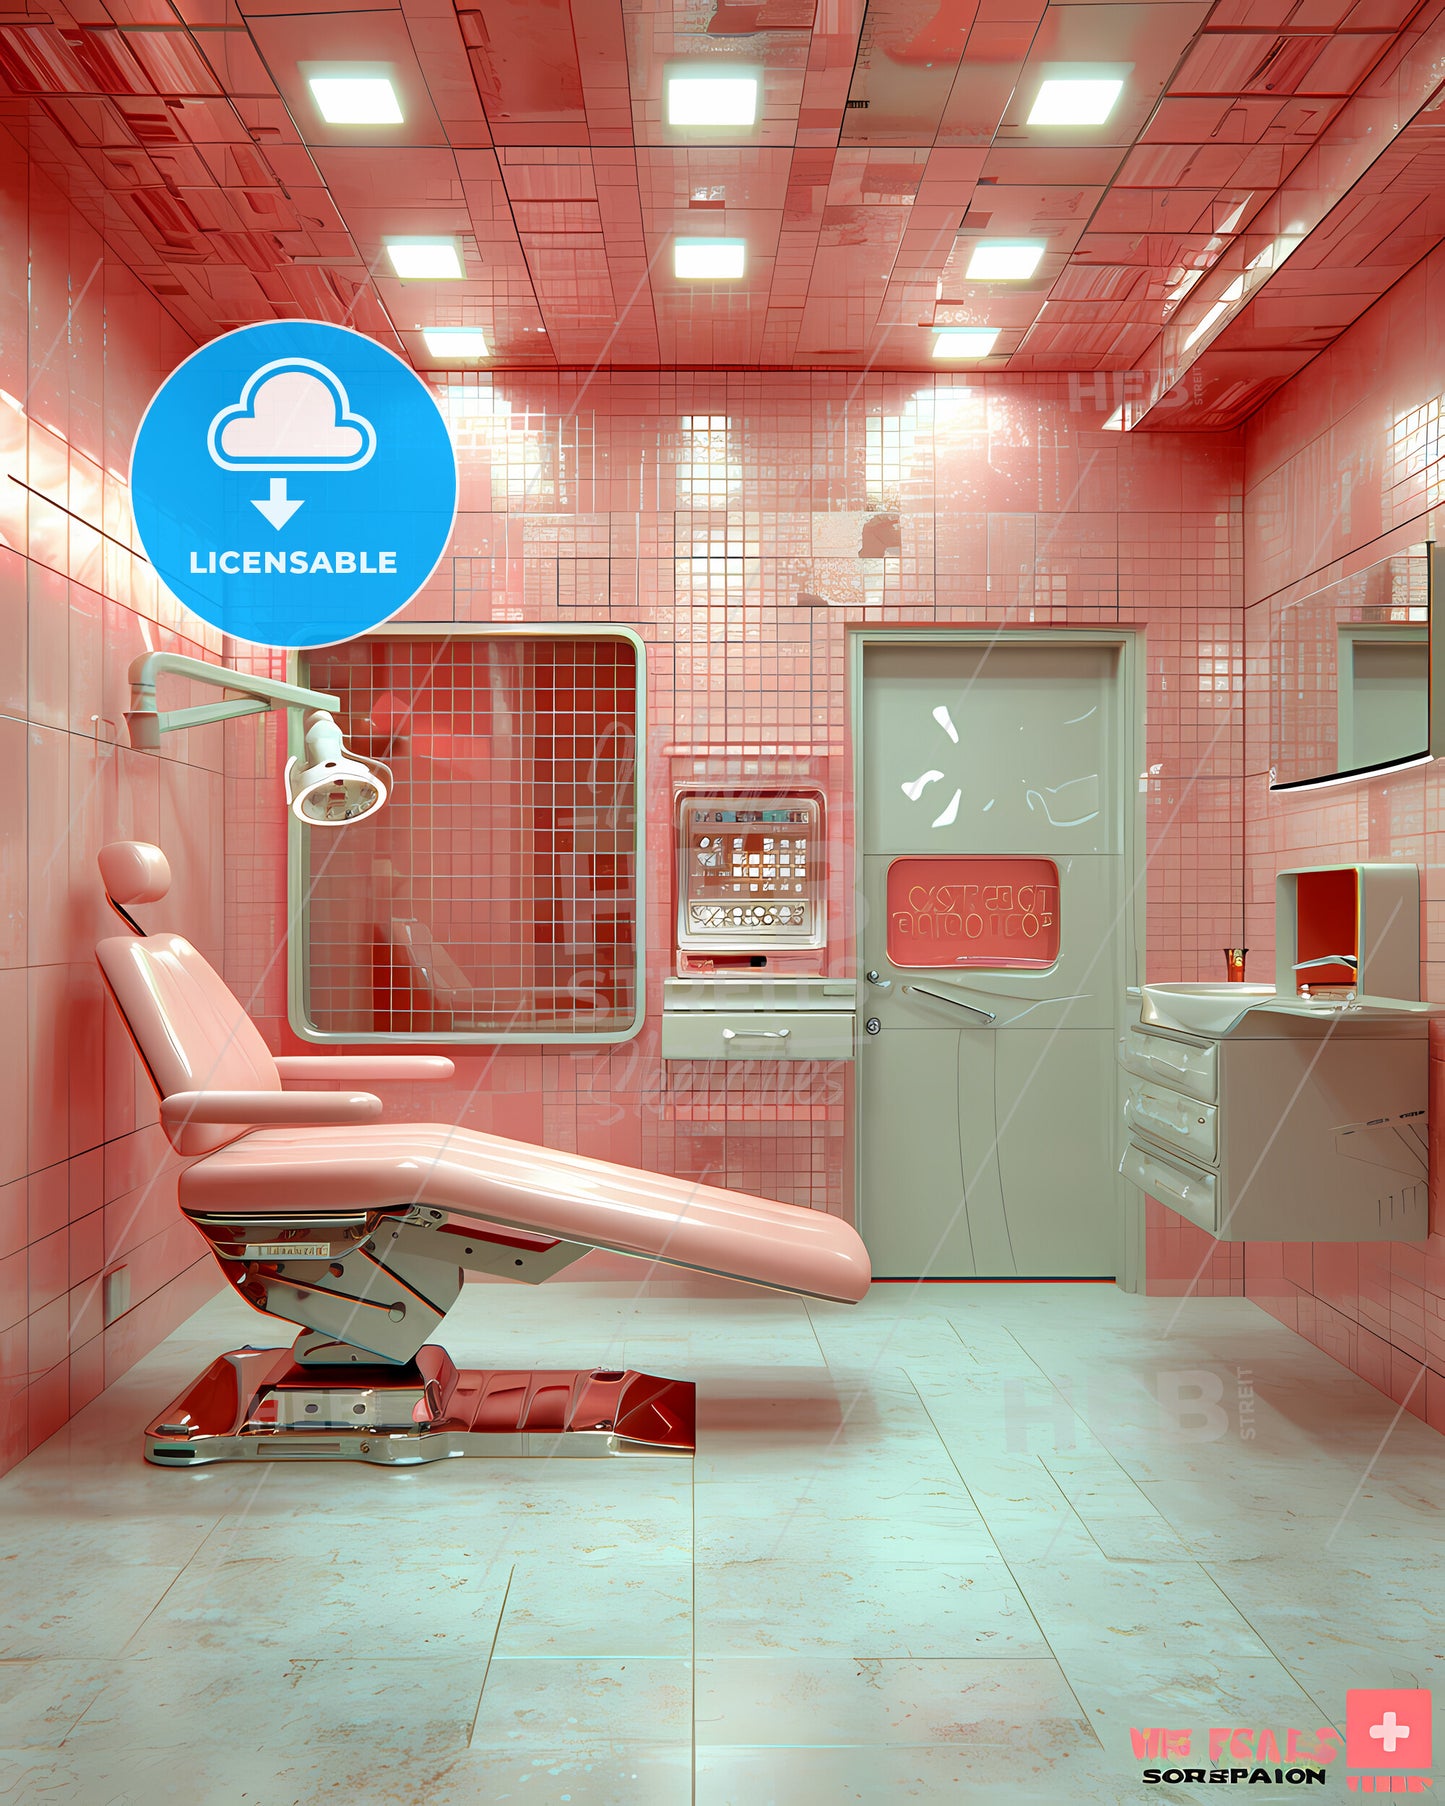 Today, Surprise Chats May Lift Your Spirits - A Pink Medical Chair In A Pink Room